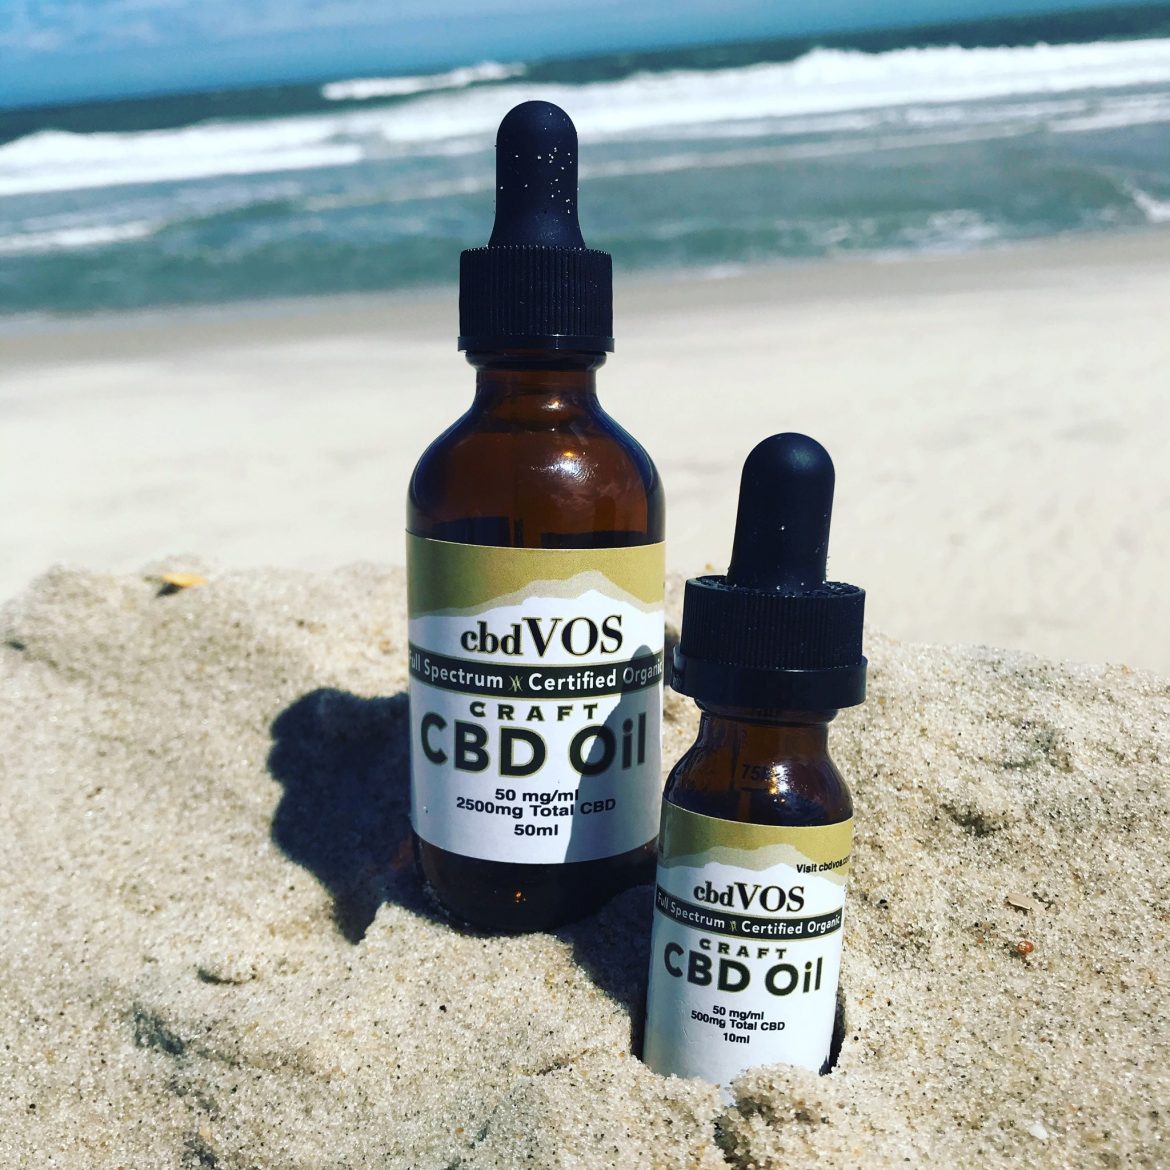 What is CBD and why is it becoming so popular?